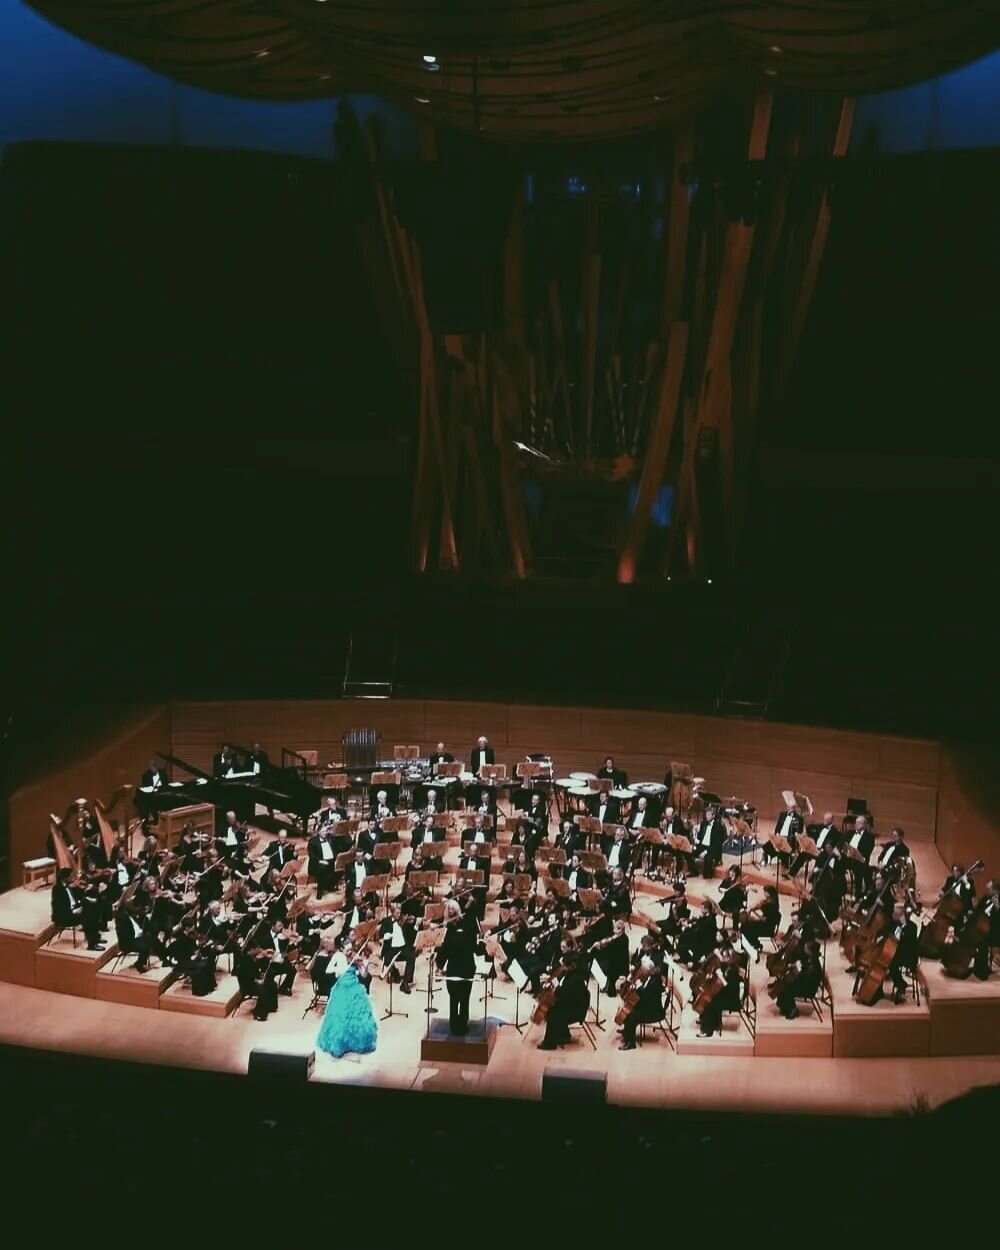 Ten years (😯😵😵) ago, I got the insane opportunity to perform with the Hollywood Bowl Orchestra under Maestro Thomas Wilkins, at the gorgeous Disney Hall, no less.  A memory I will hold onto forever~ 🎶